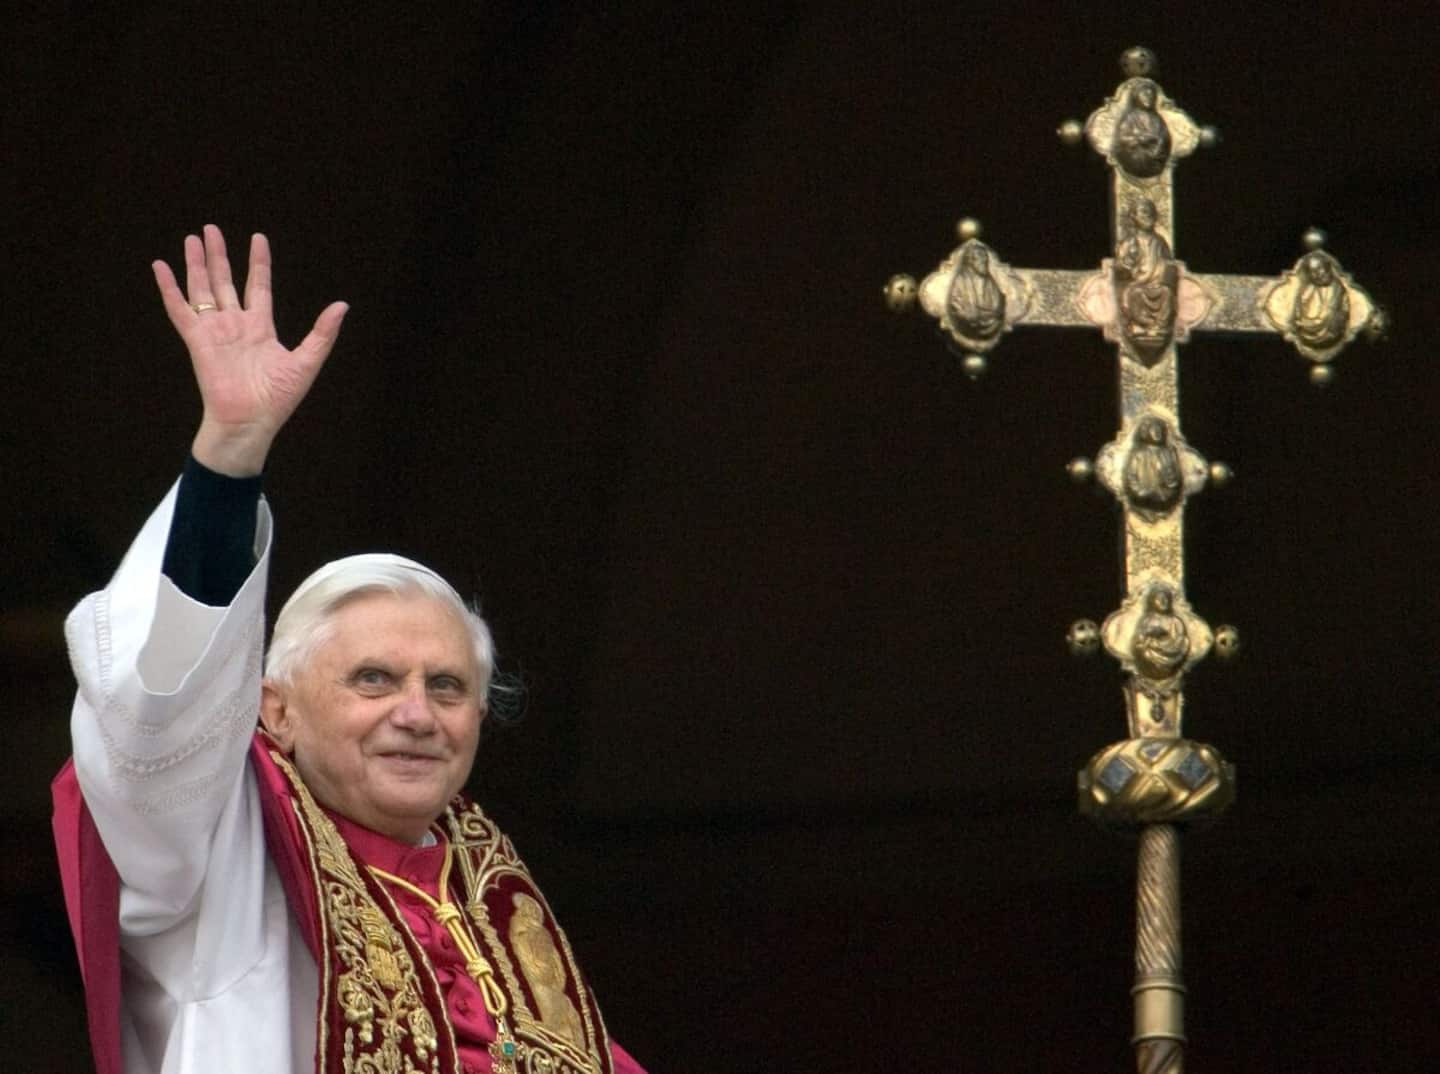 Benedict XVI, dead at 95, will be buried on January 5